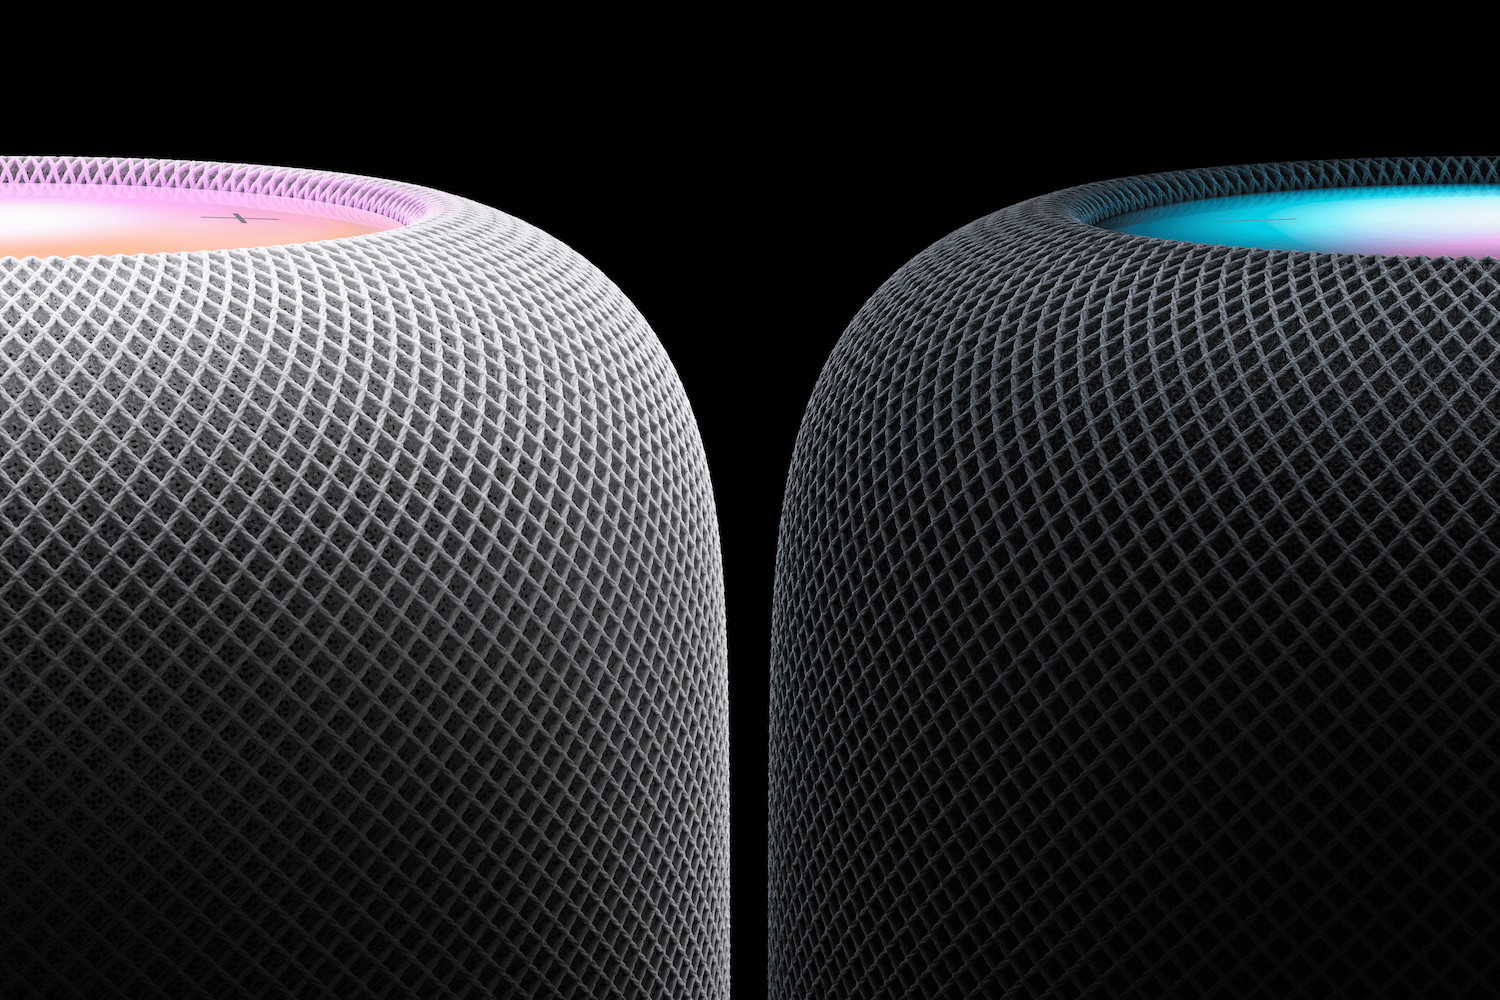 two Apple homepods on a black background